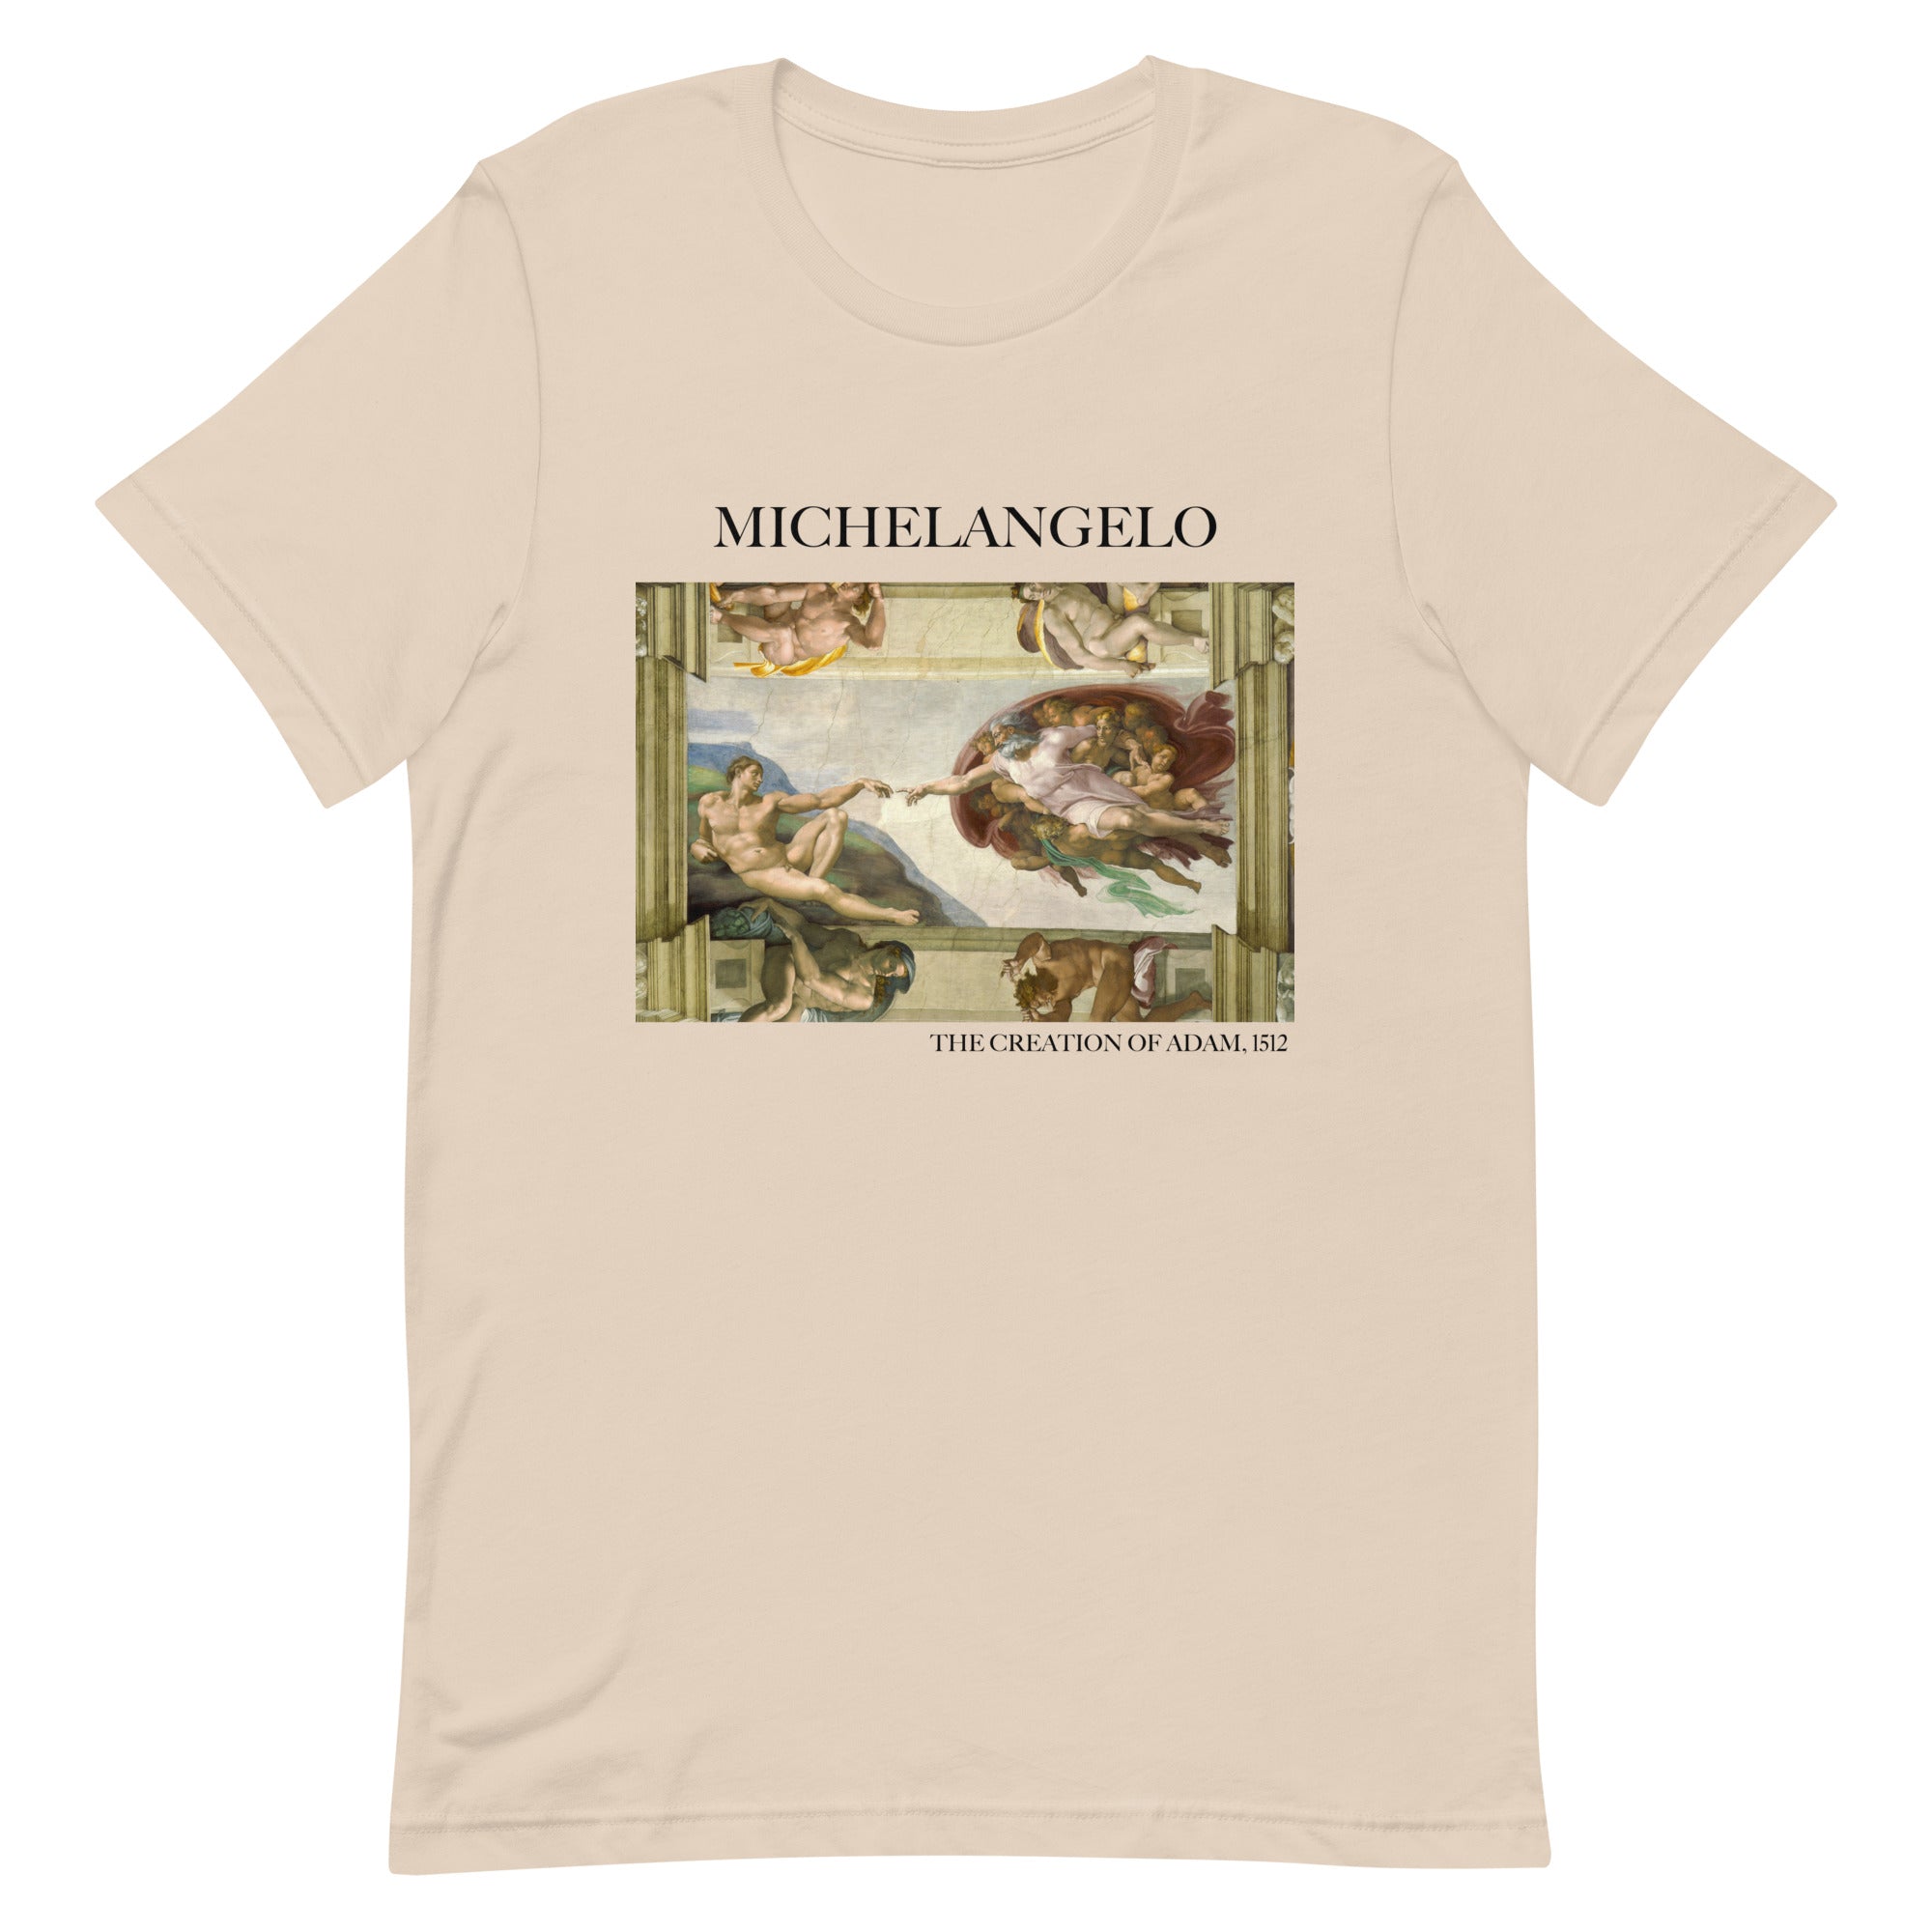 Michelangelo 'The Creation of Adam' Famous Painting T-Shirt | Unisex Classic Art Tee